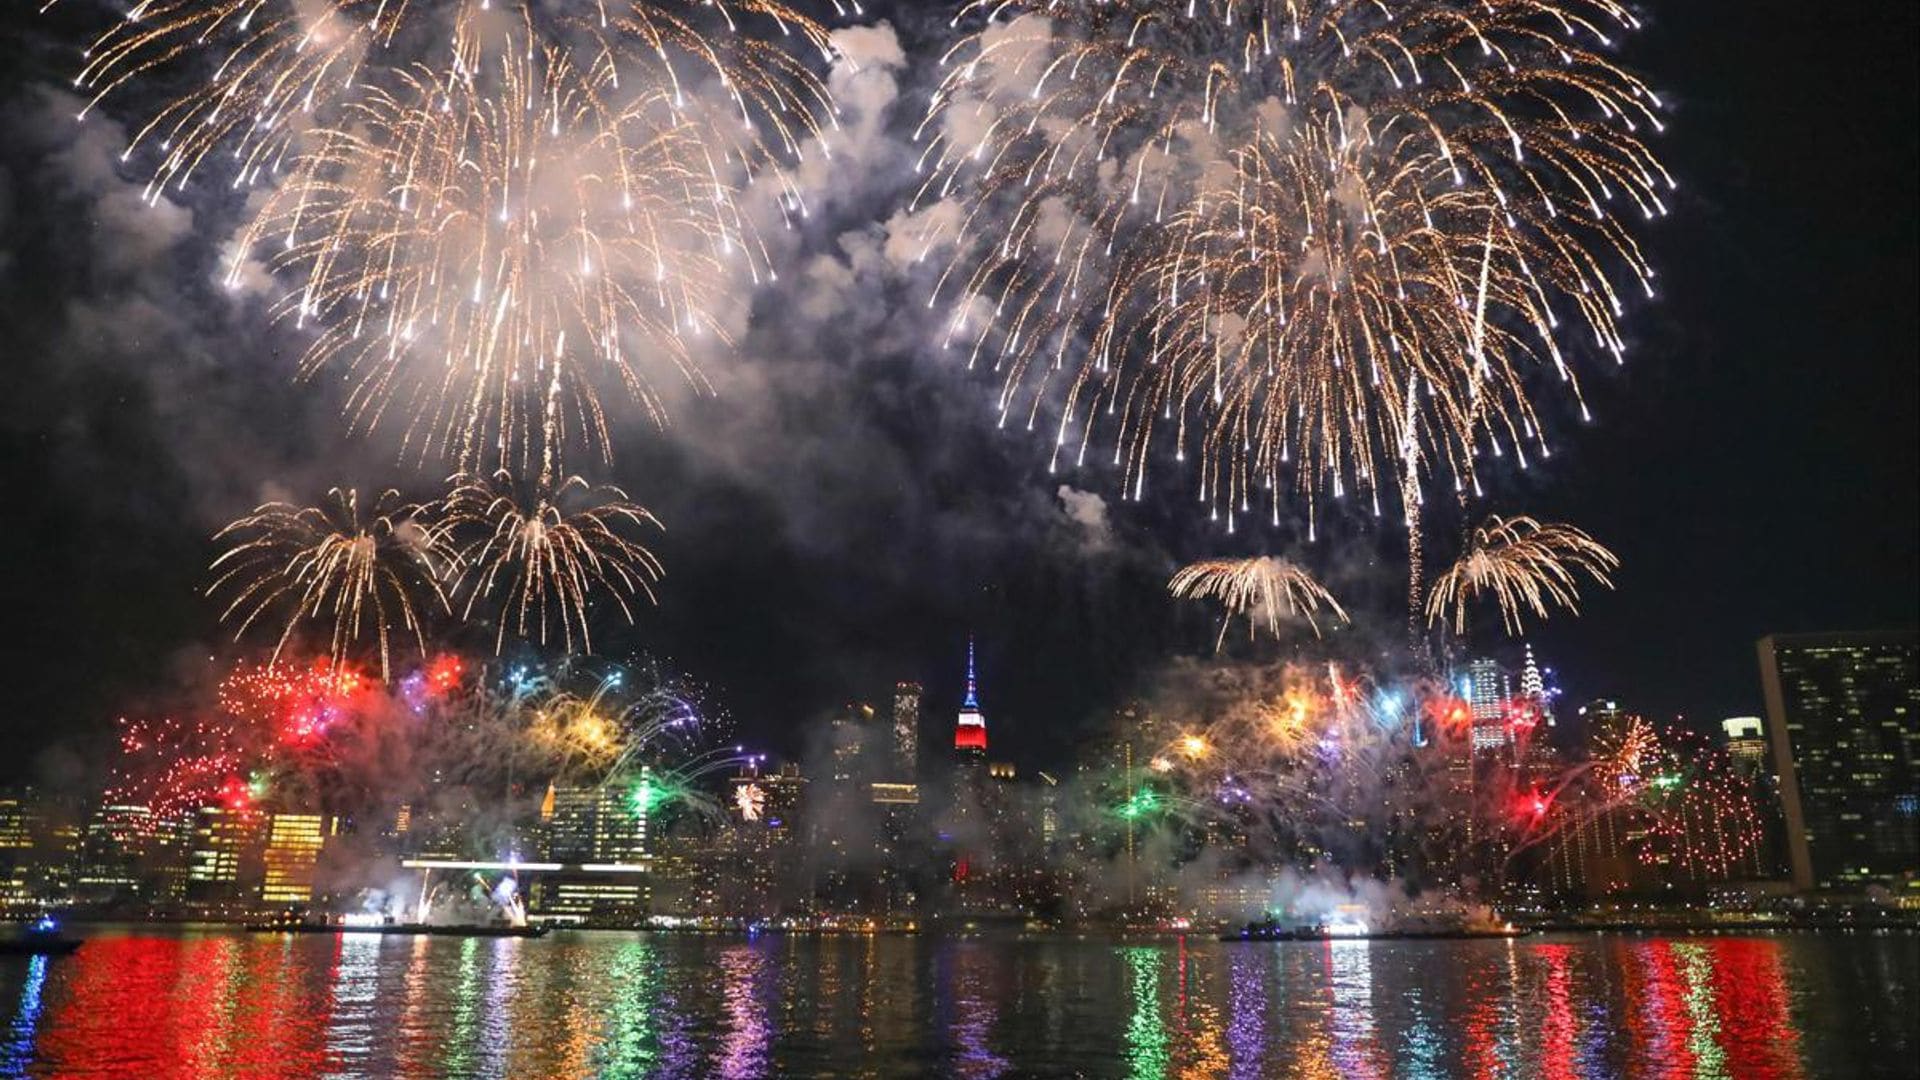 Where and how to watch the iconic Macy’s 4th of July fireworks show